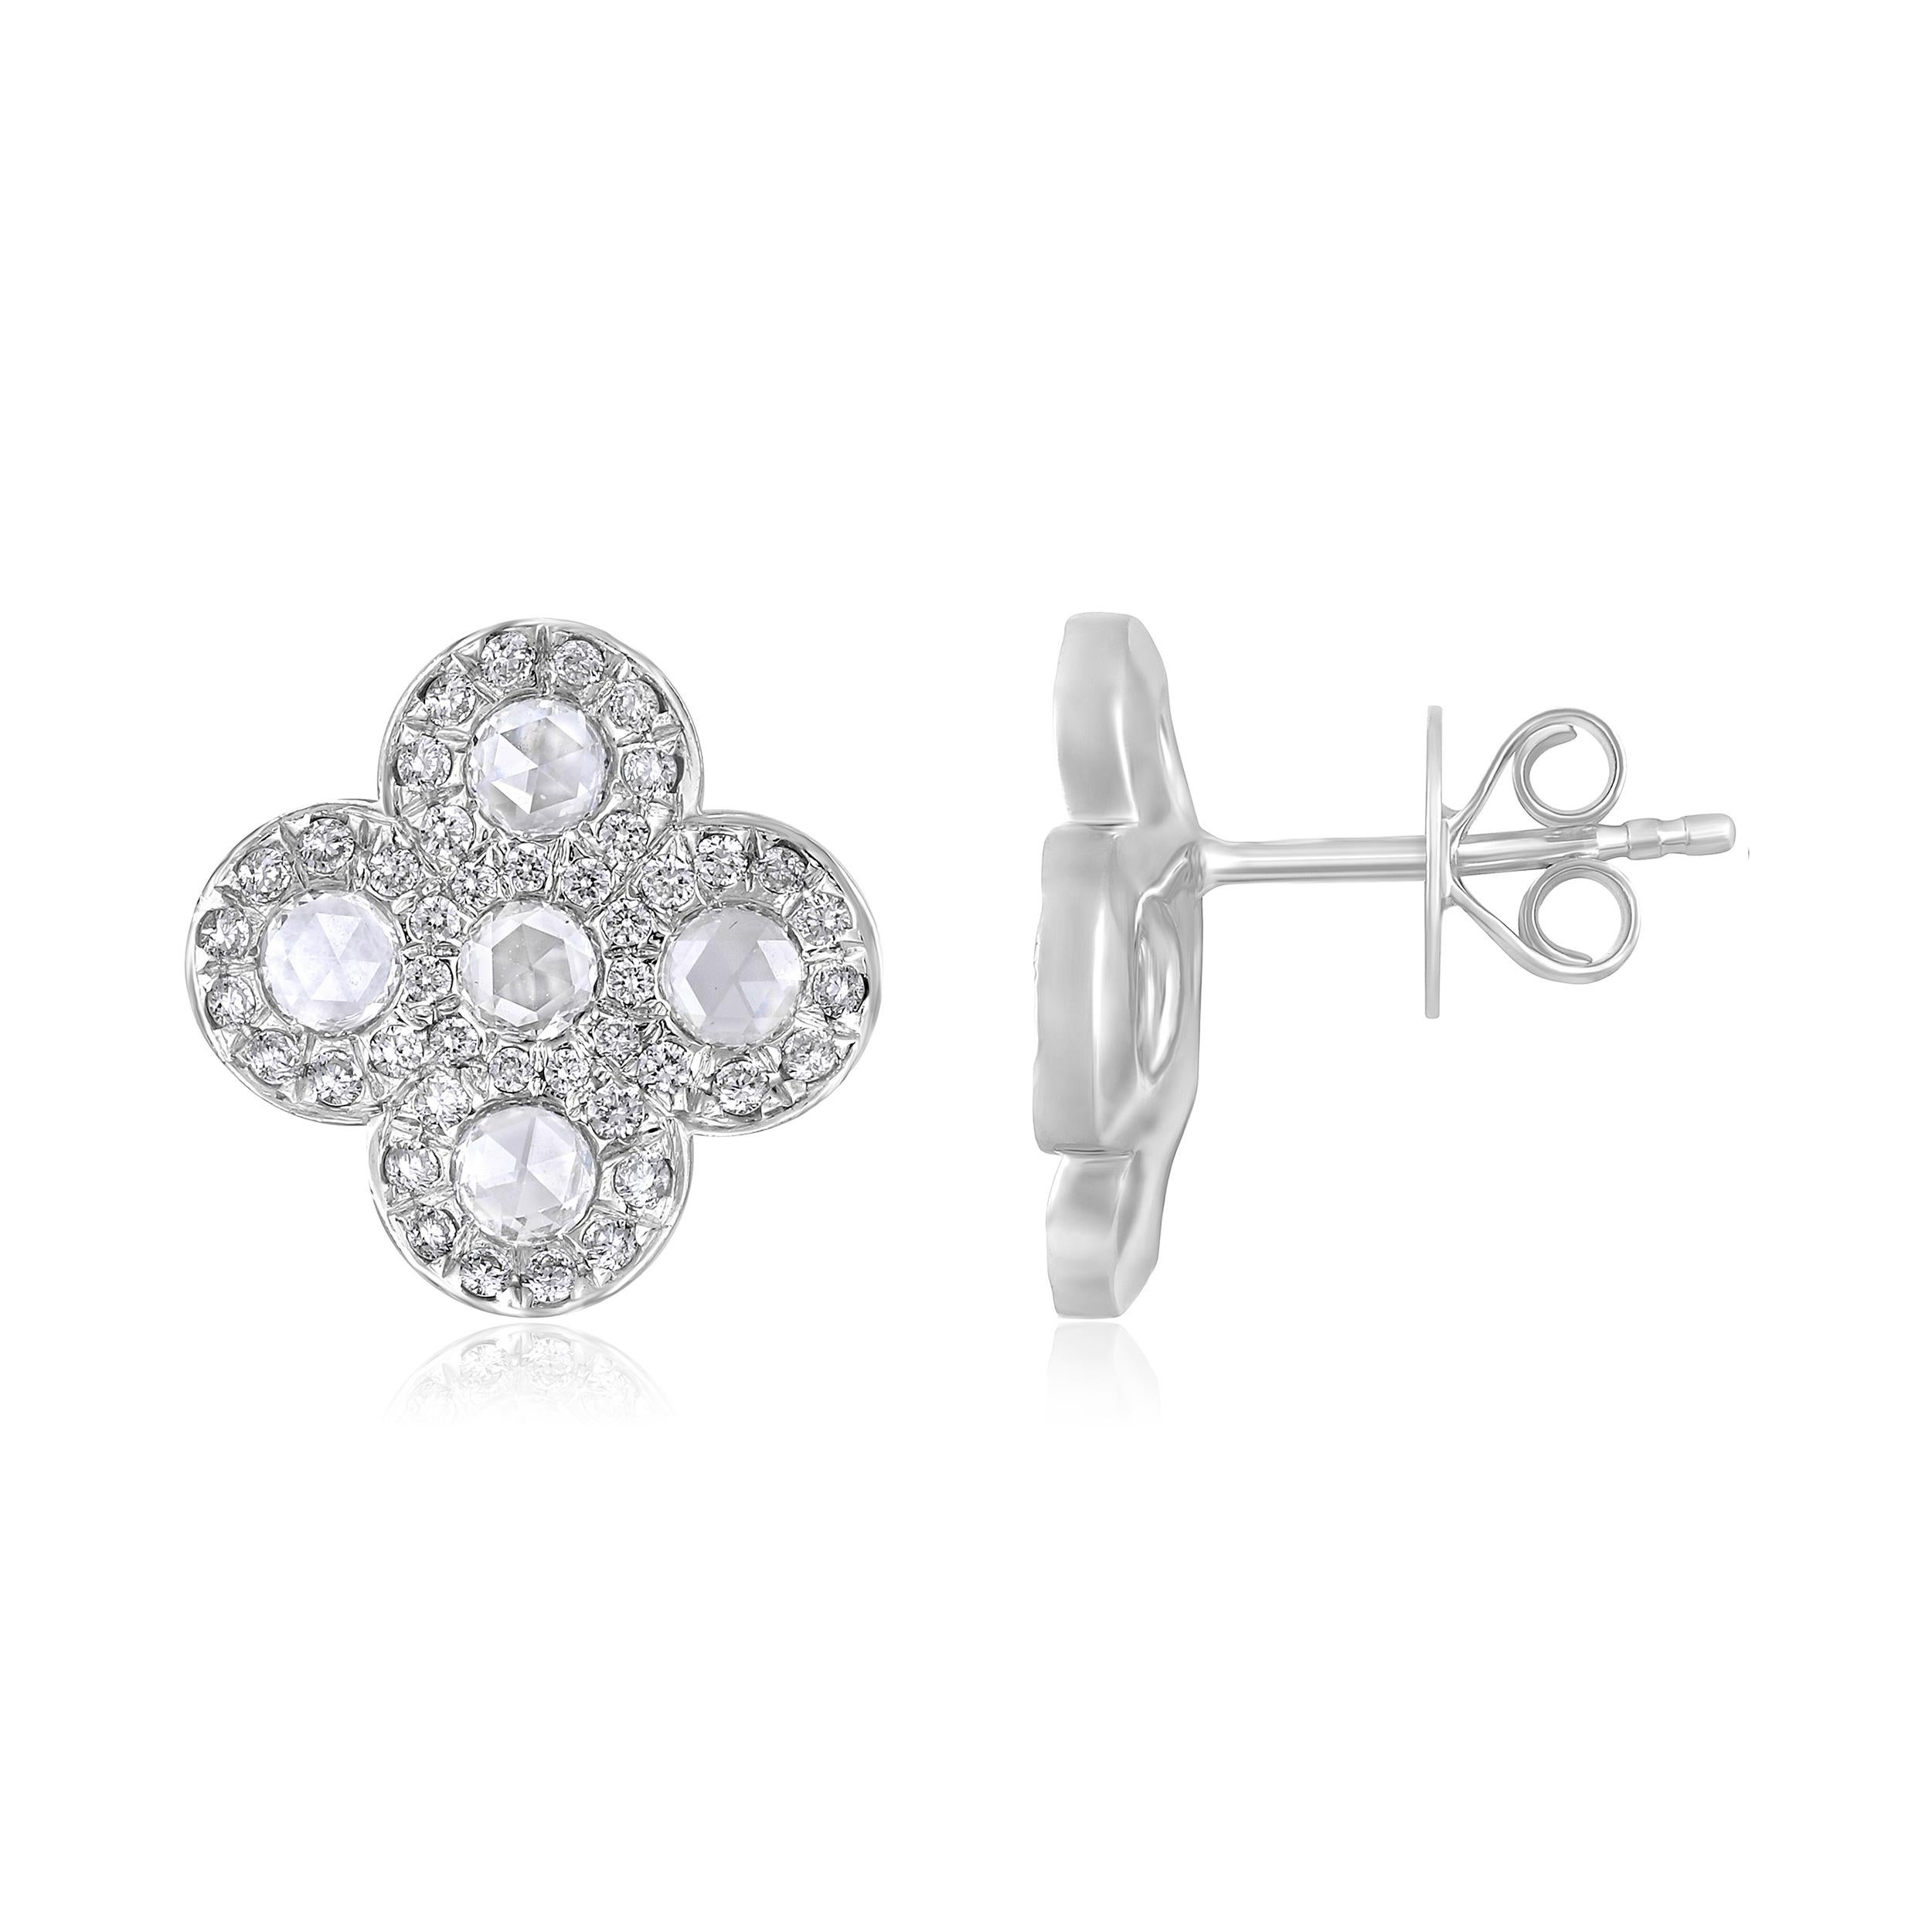 Crafted in 4.68 grams of 18K White Gold, the earrings contain 10 stones of Rose Cut Natural Diamonds with a total of 0.57 carat in E-F color and VVS-VS clarity combined with 86 stones of Round Natural Diamonds with a total of 0.43 carat in E-F color